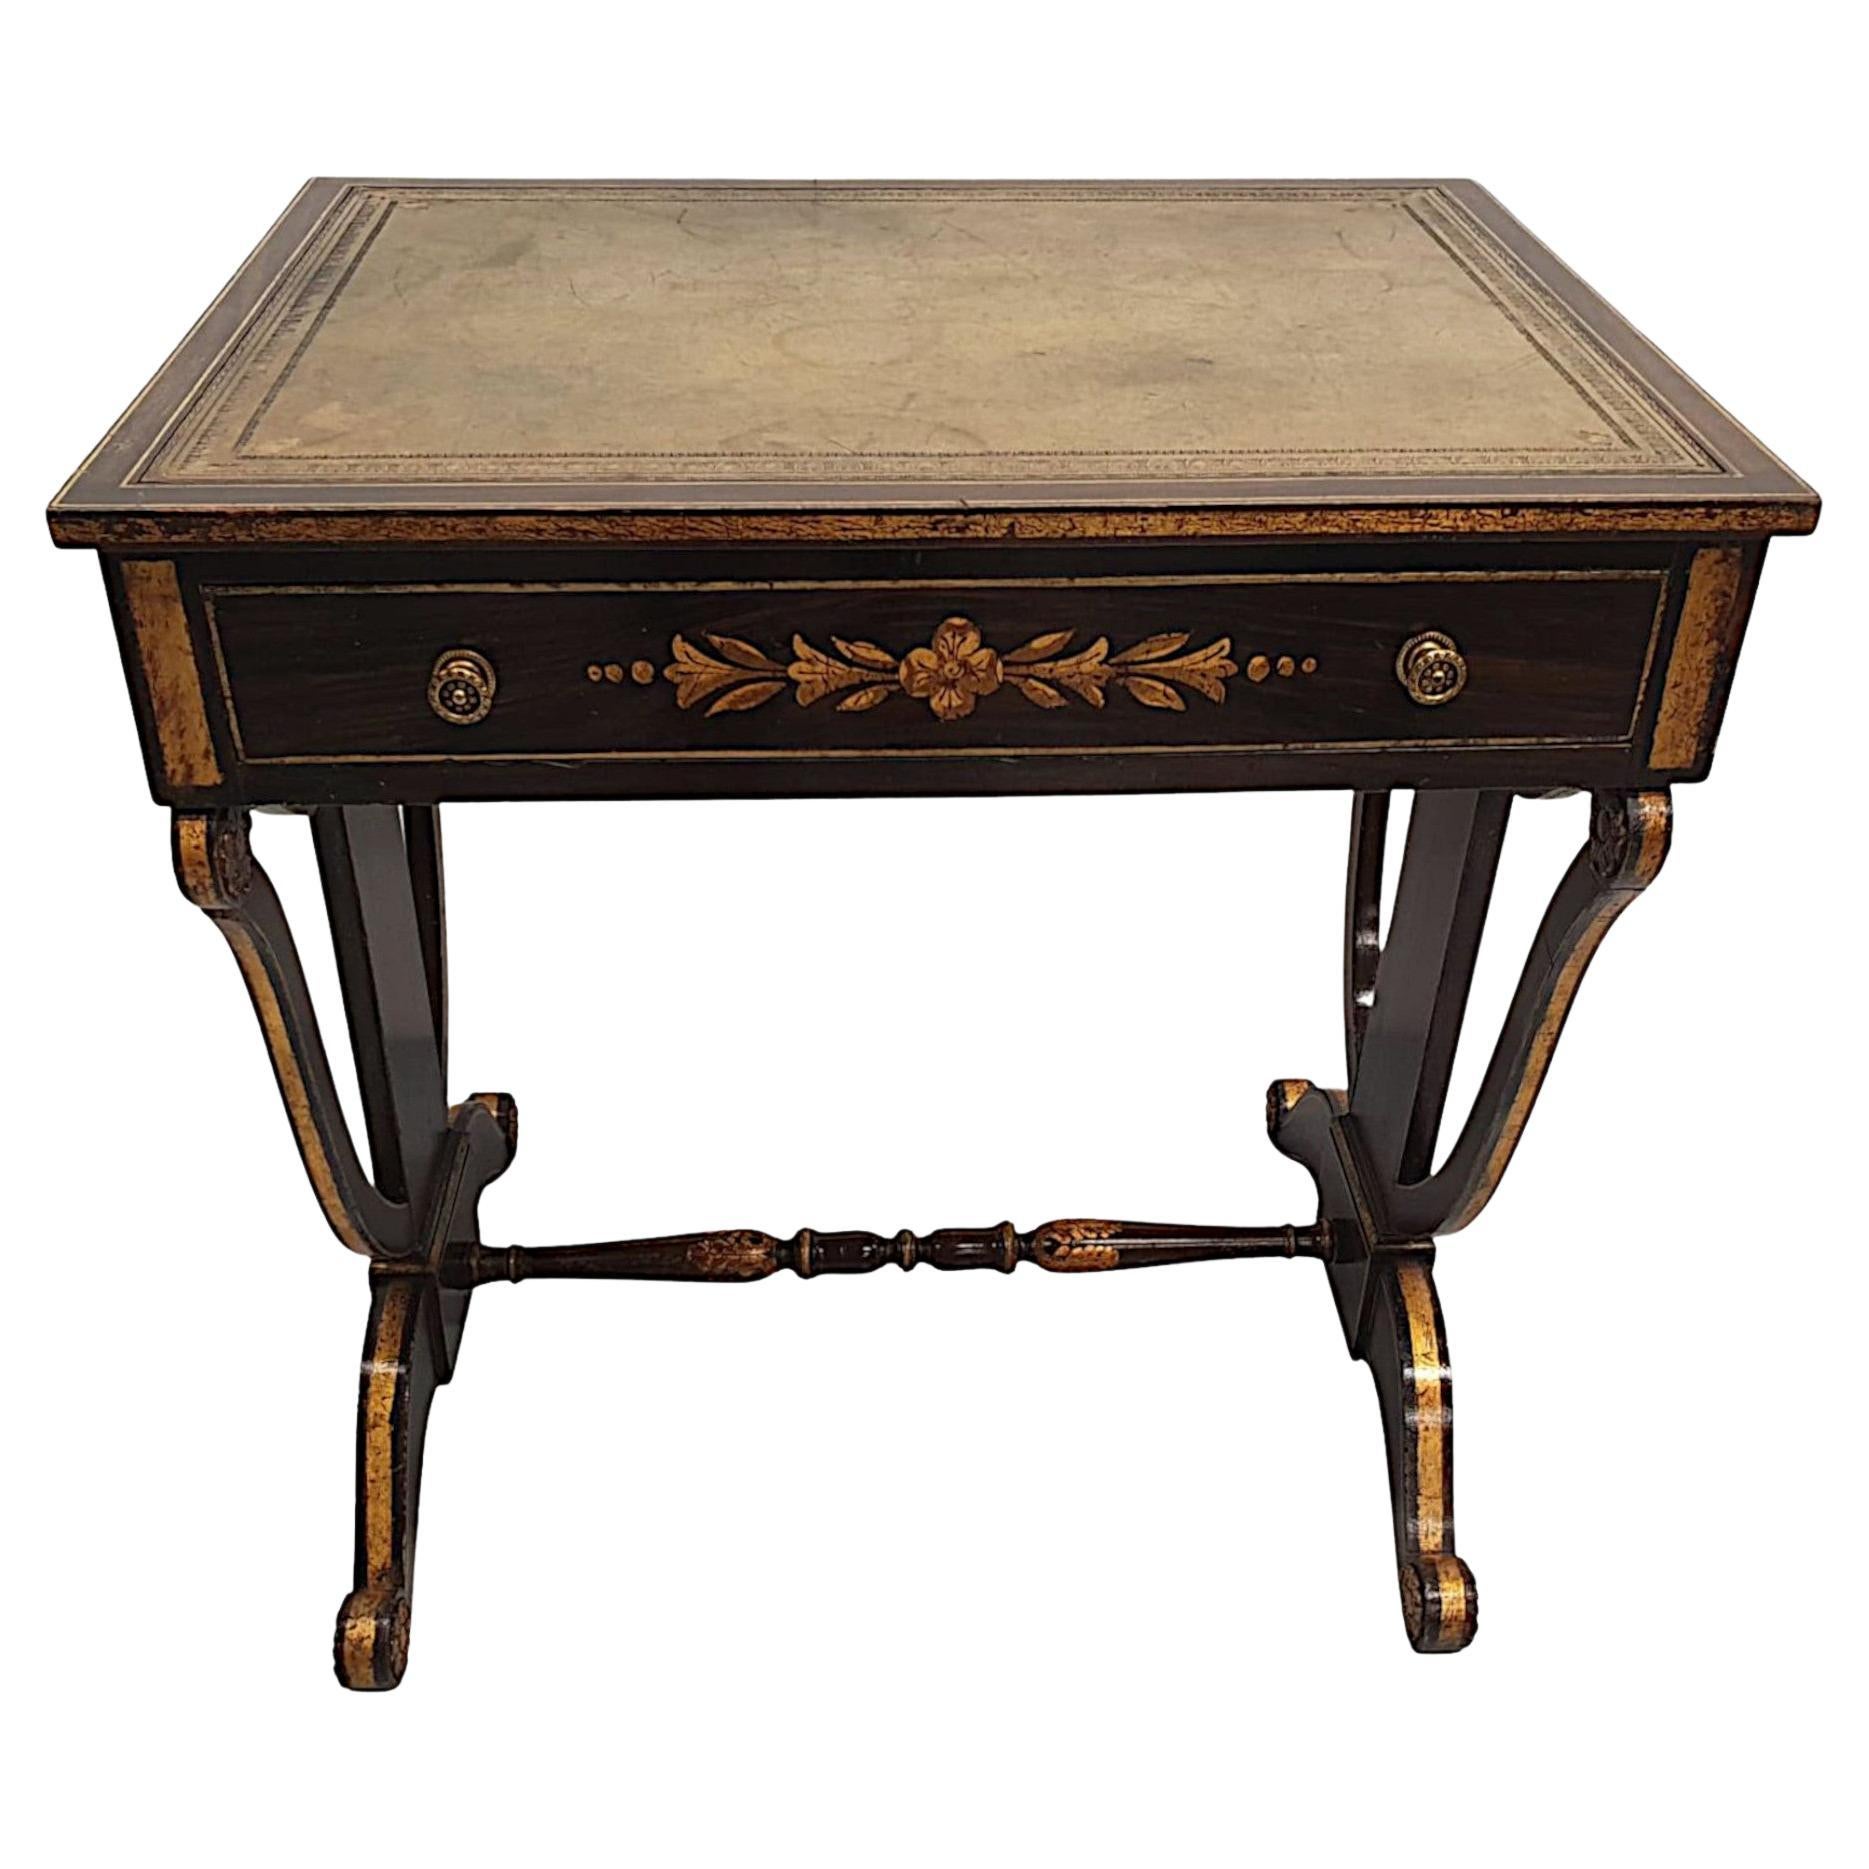 Rare Early 19th Century American Baltimore Federal Parcel Gilt Writing Desk For Sale